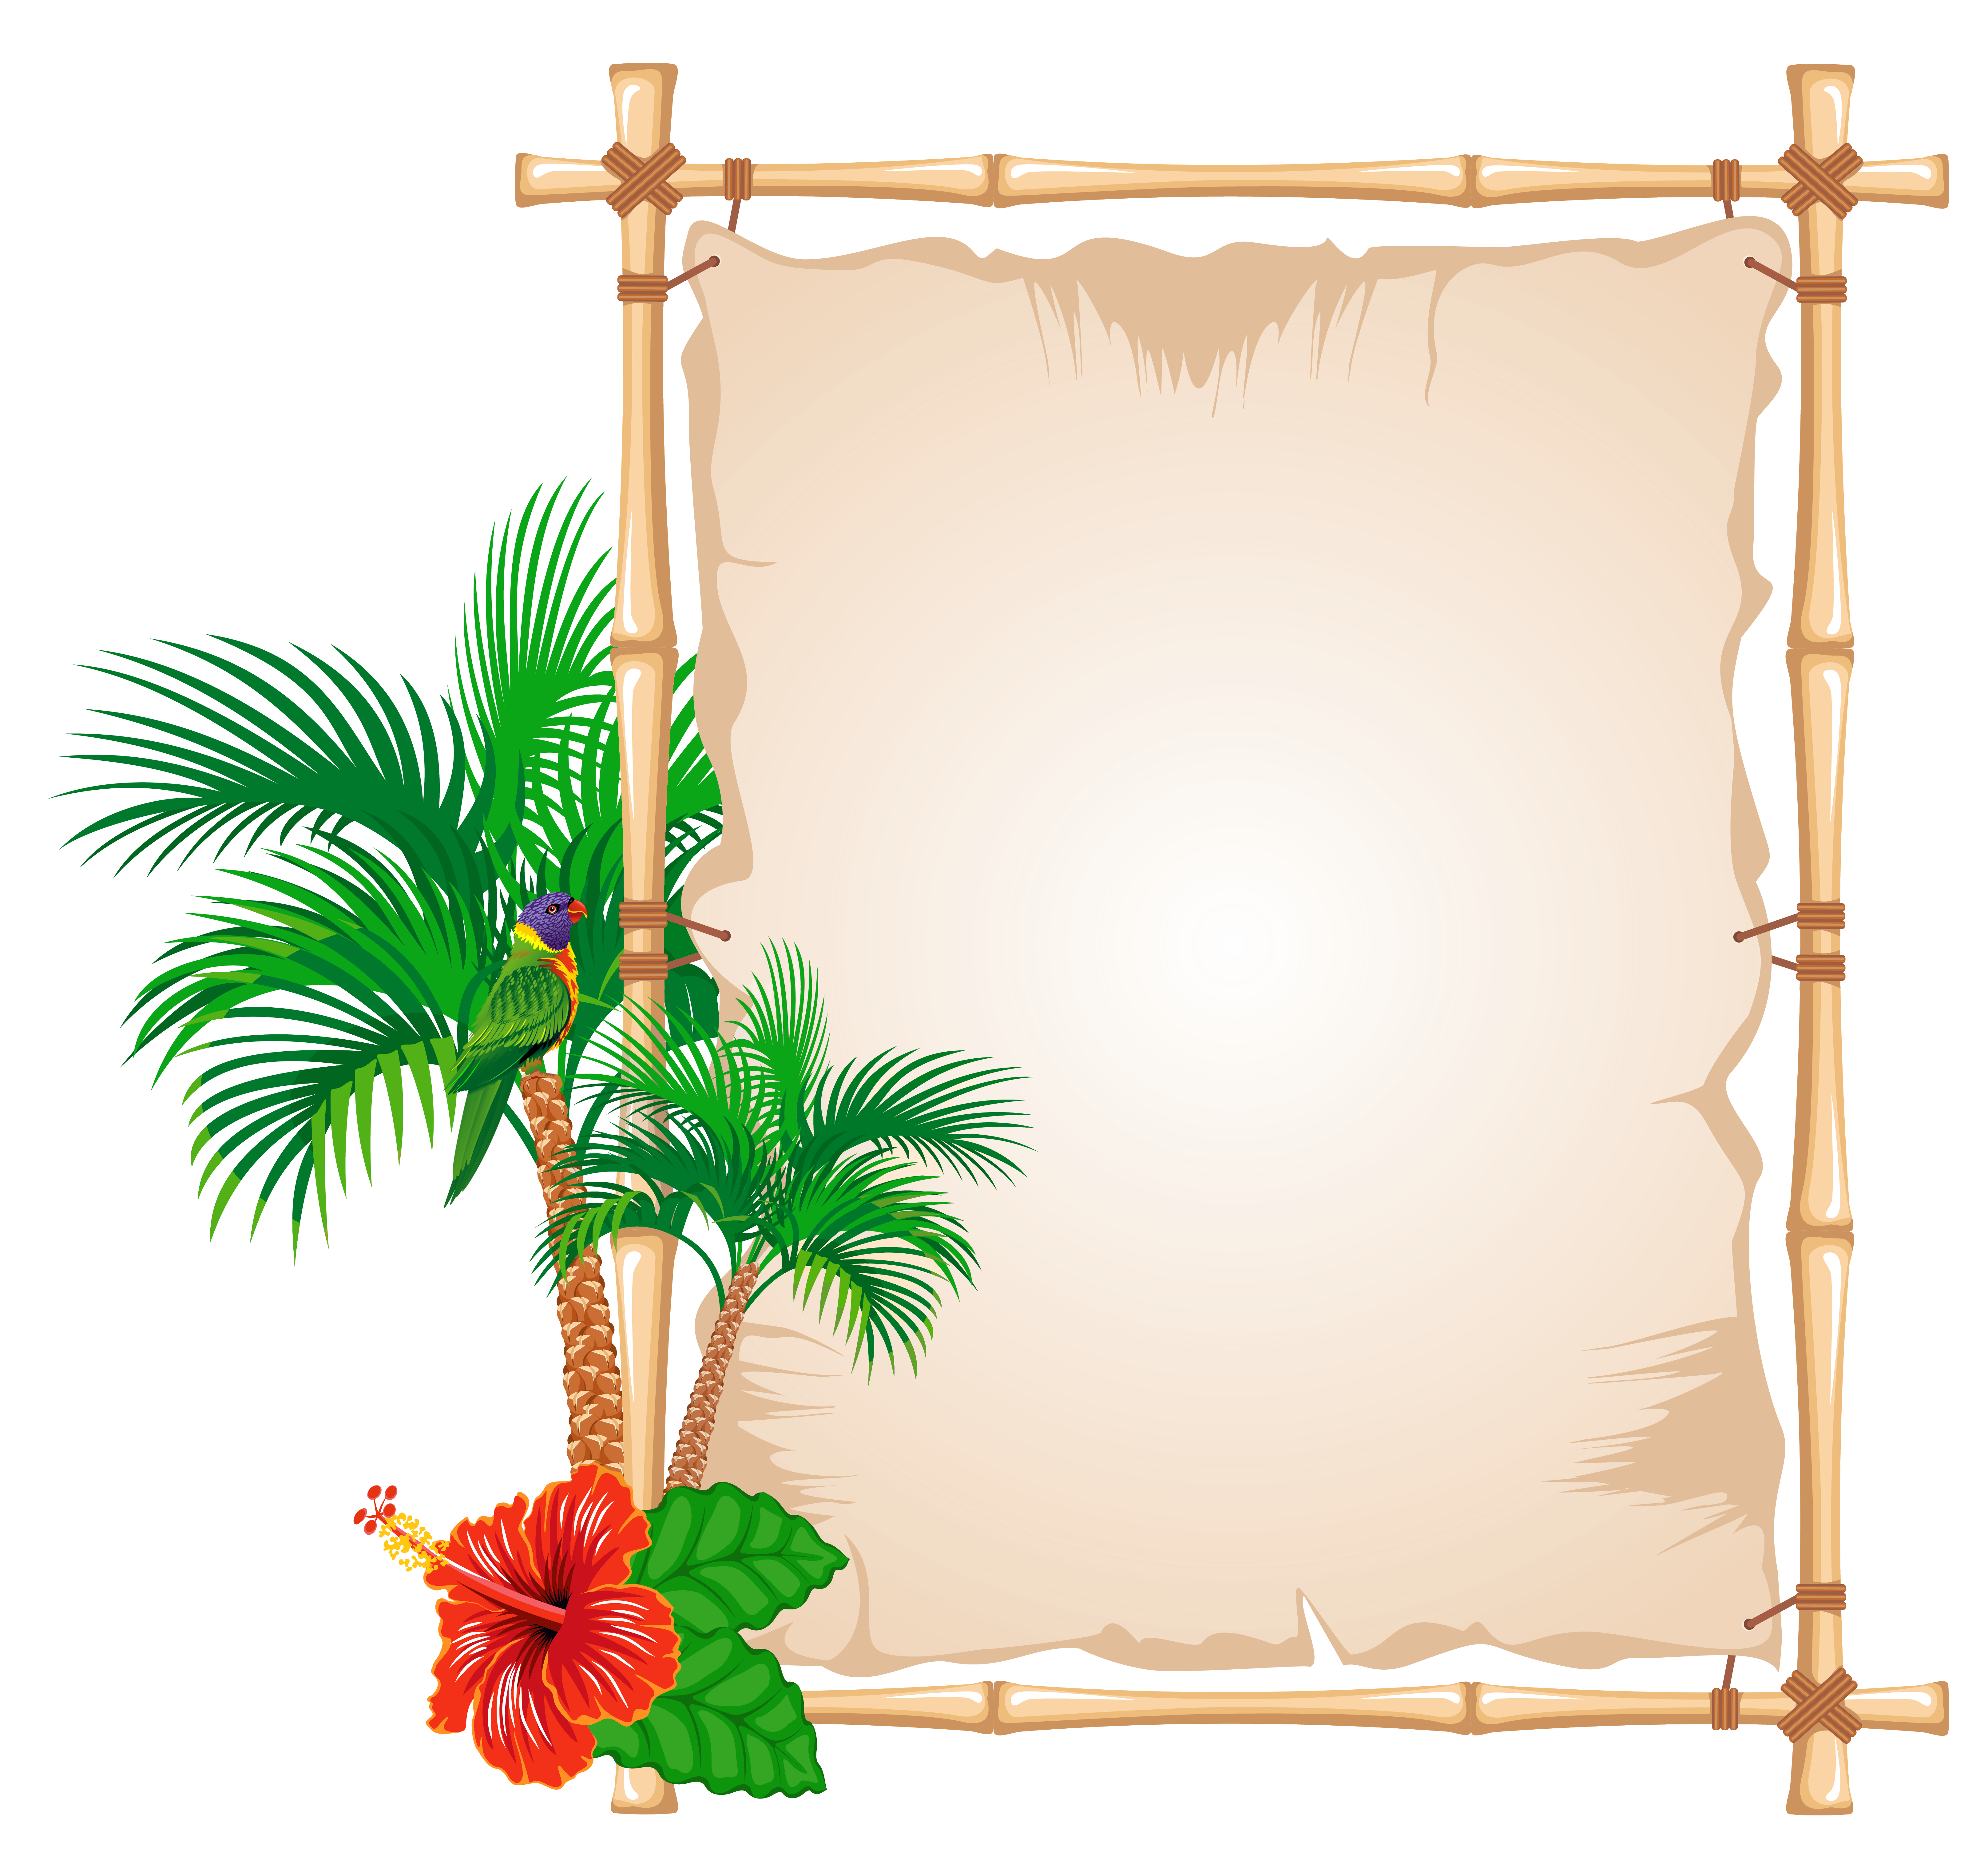 Picture Frame Bambusodae Papyrus Summer Free Transparent Image HQ Clipart